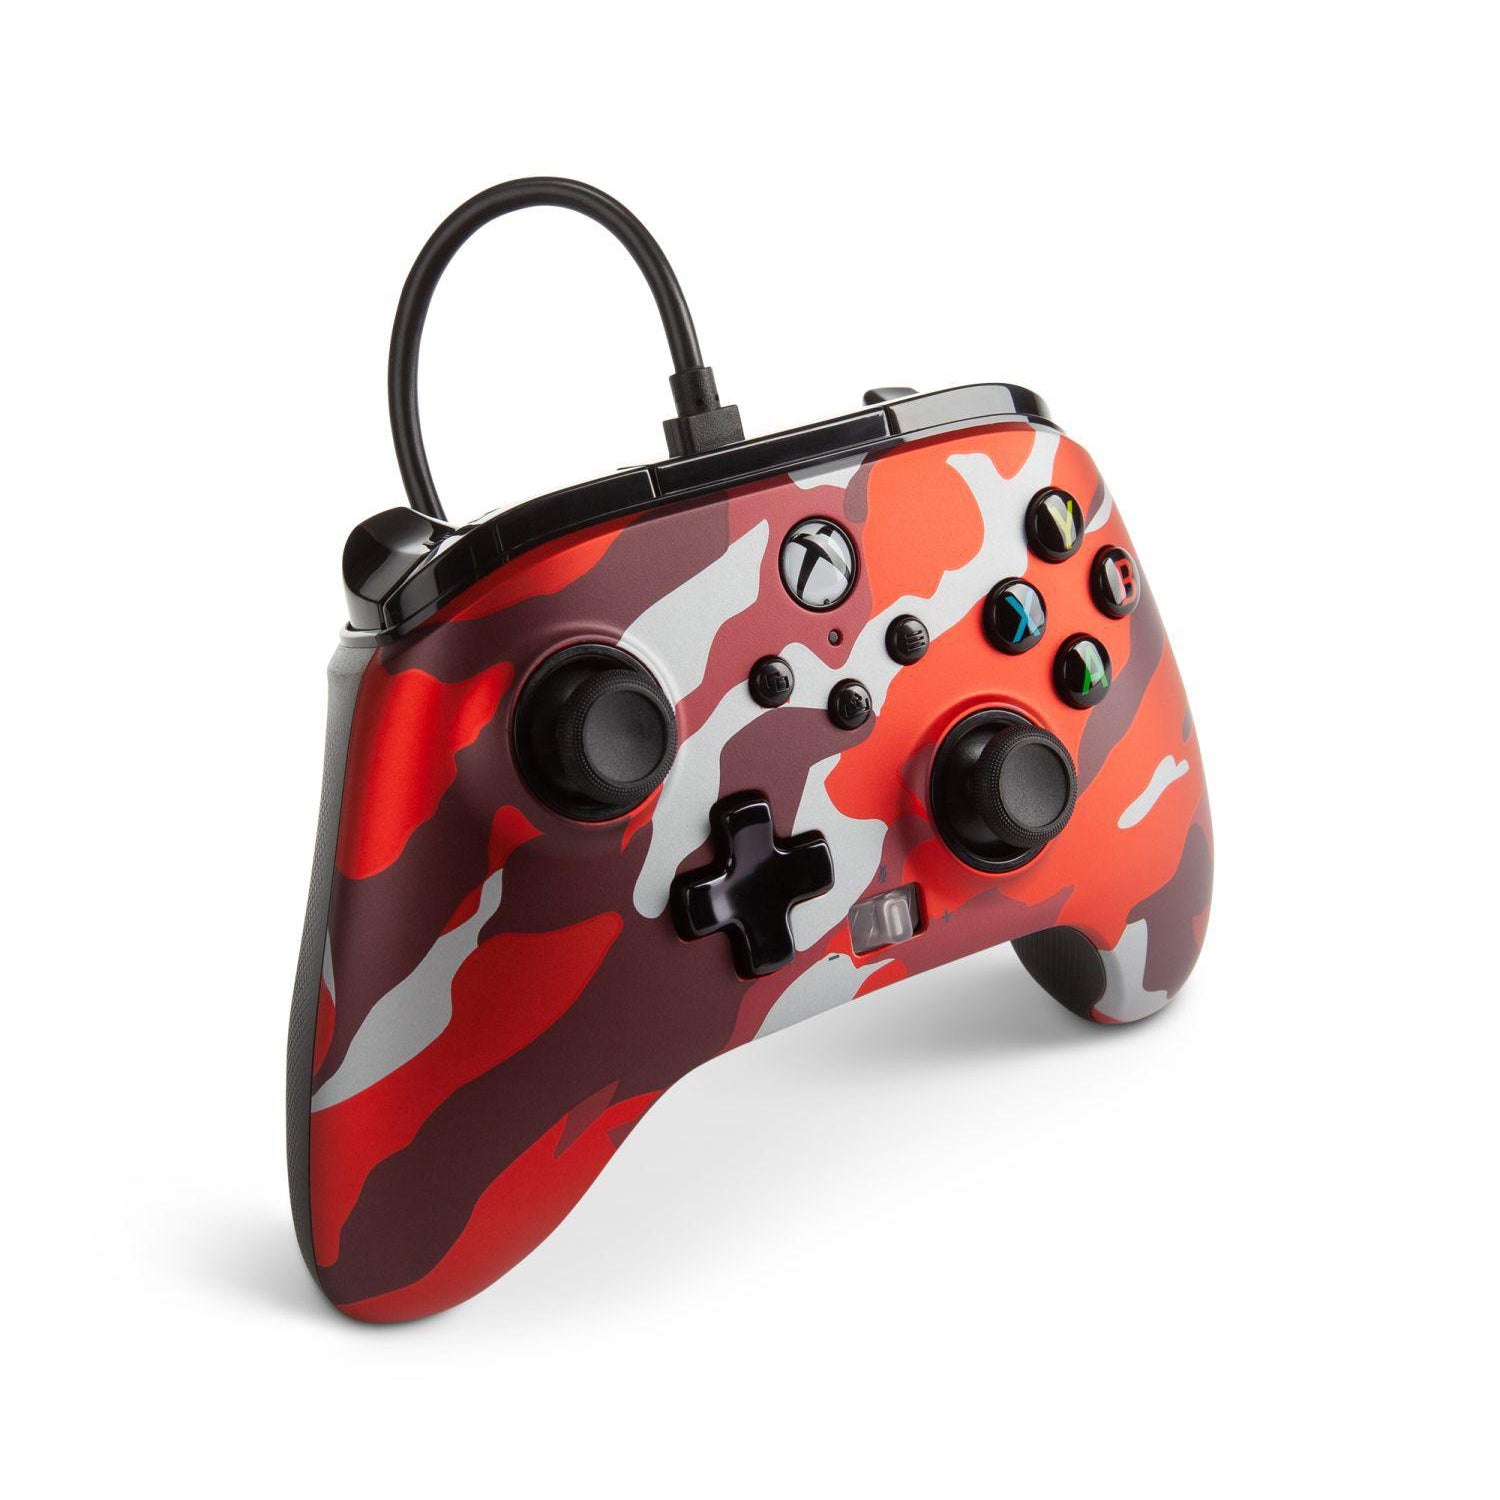 PowerA Enhanced Wired Controller for Xbox for Xbox Series X|S, Red Camo